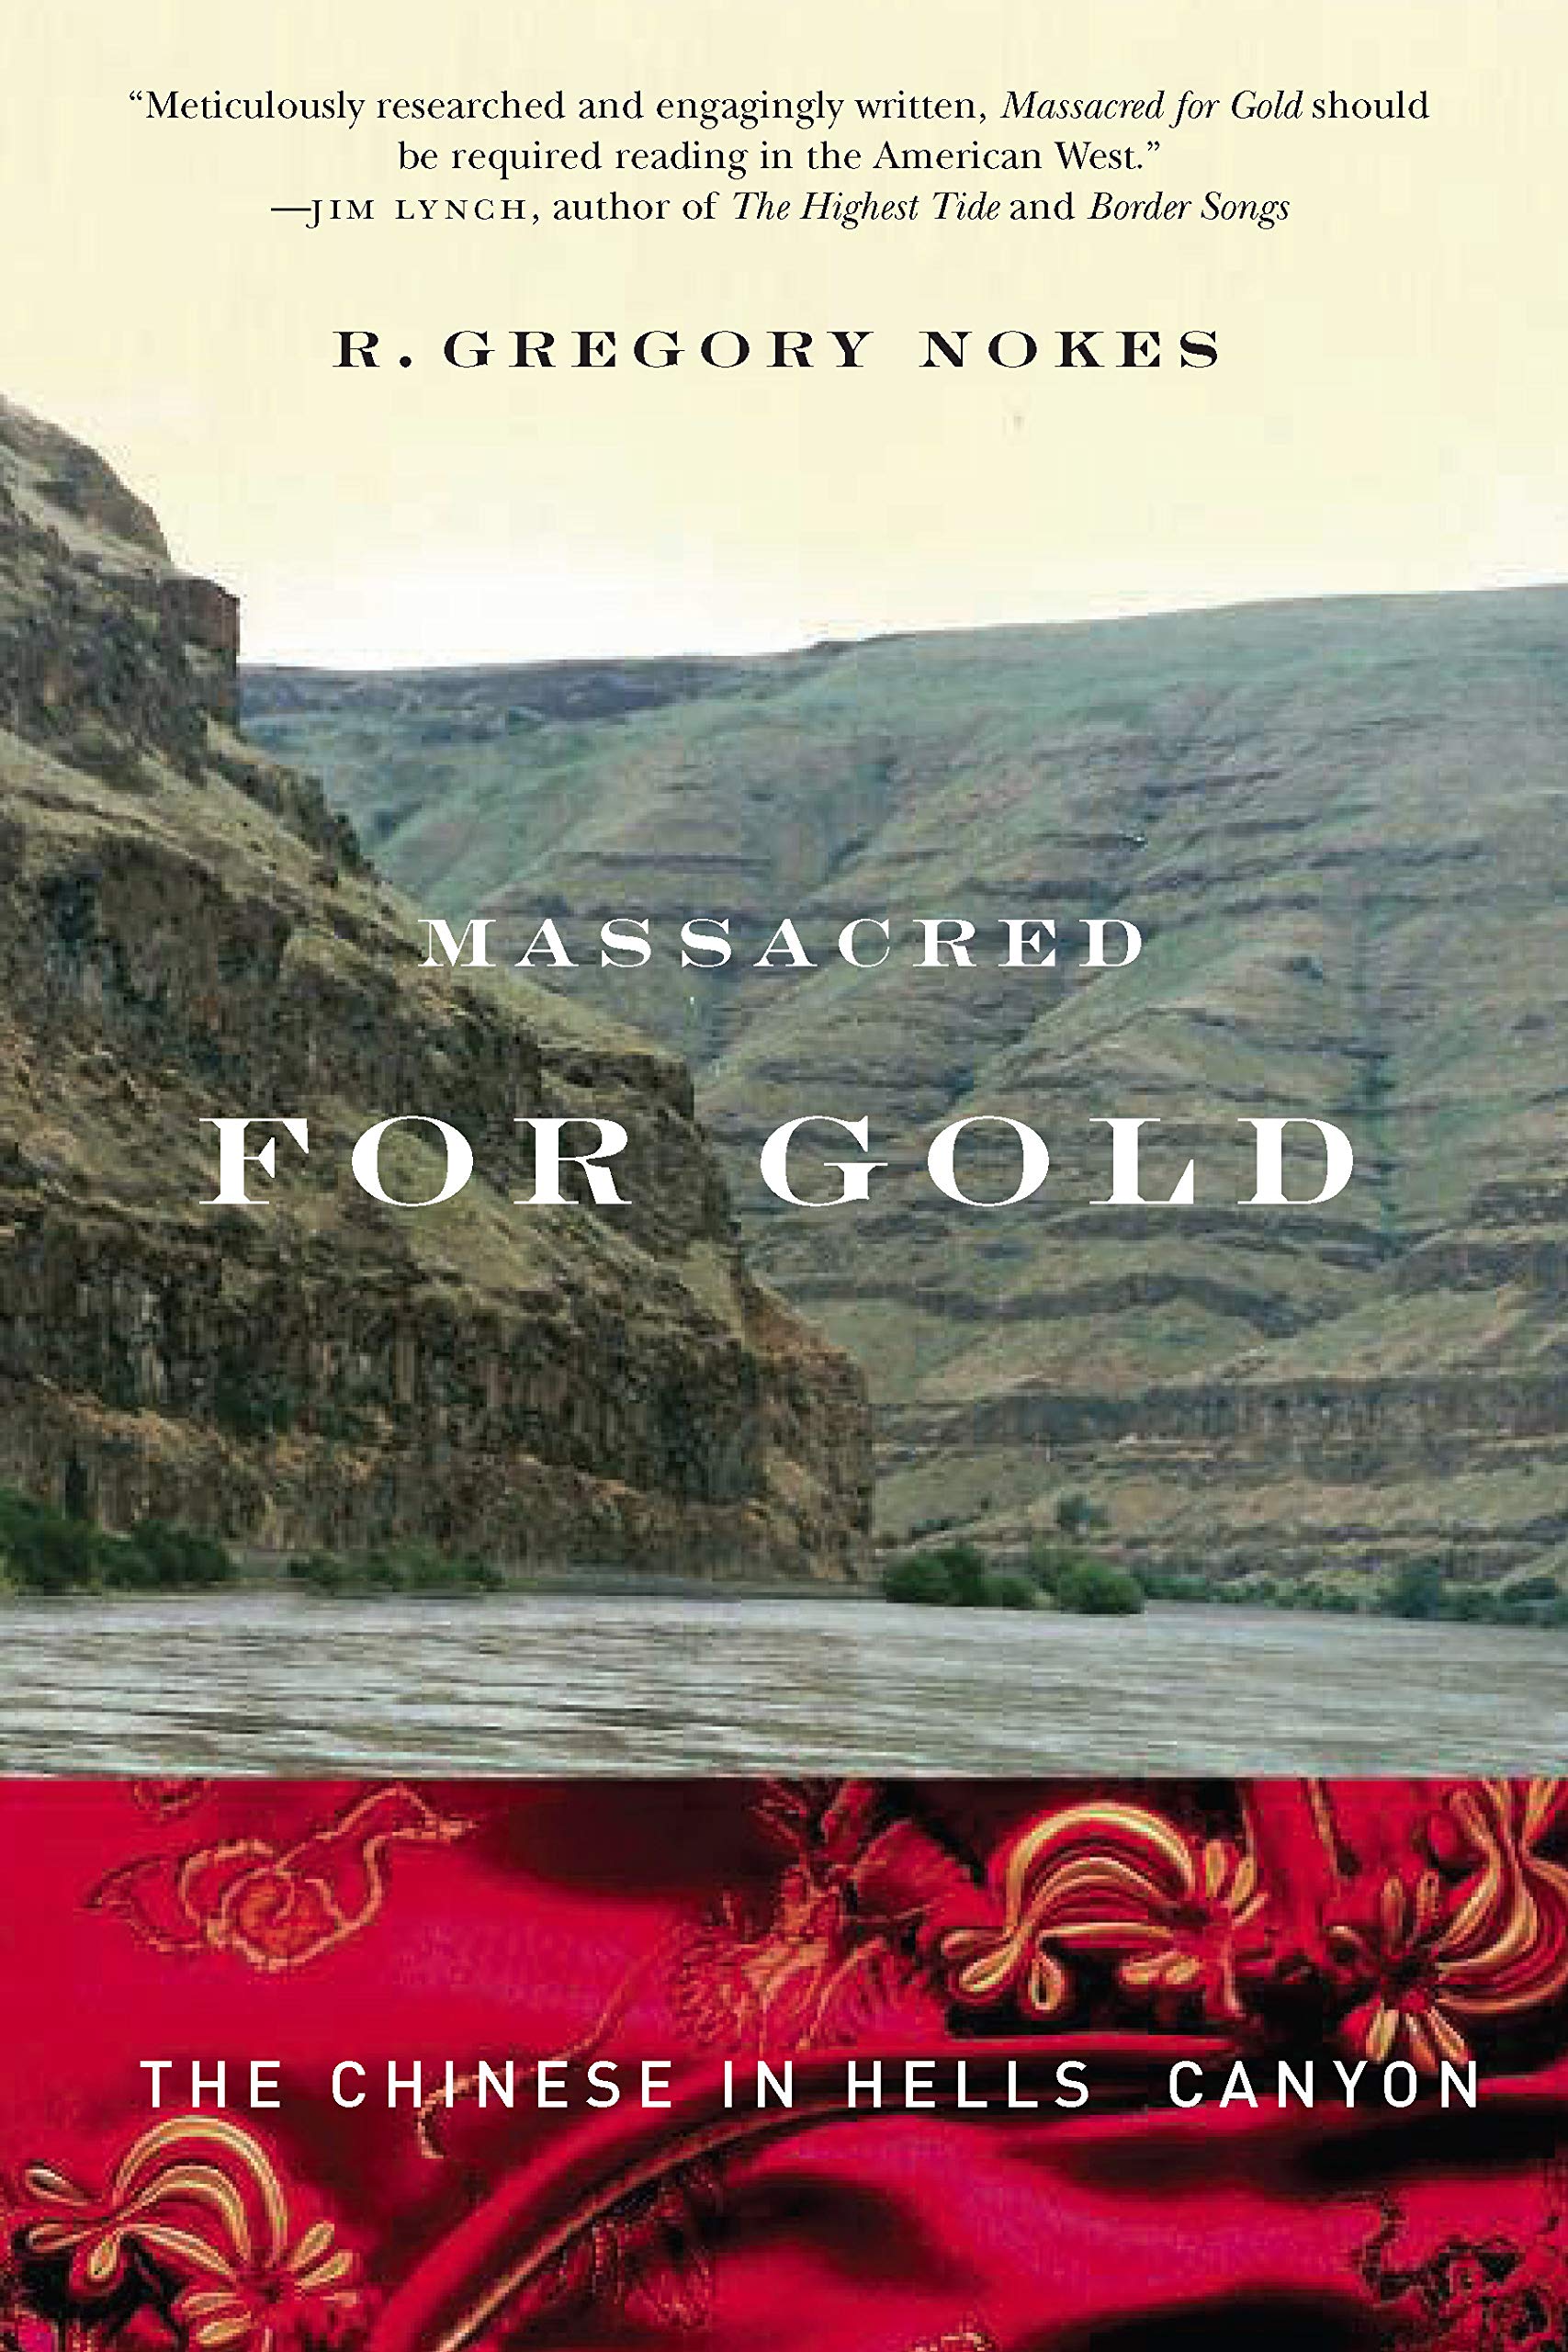 Massacred for gold: The Chinese in Hells Canyon (book cover)